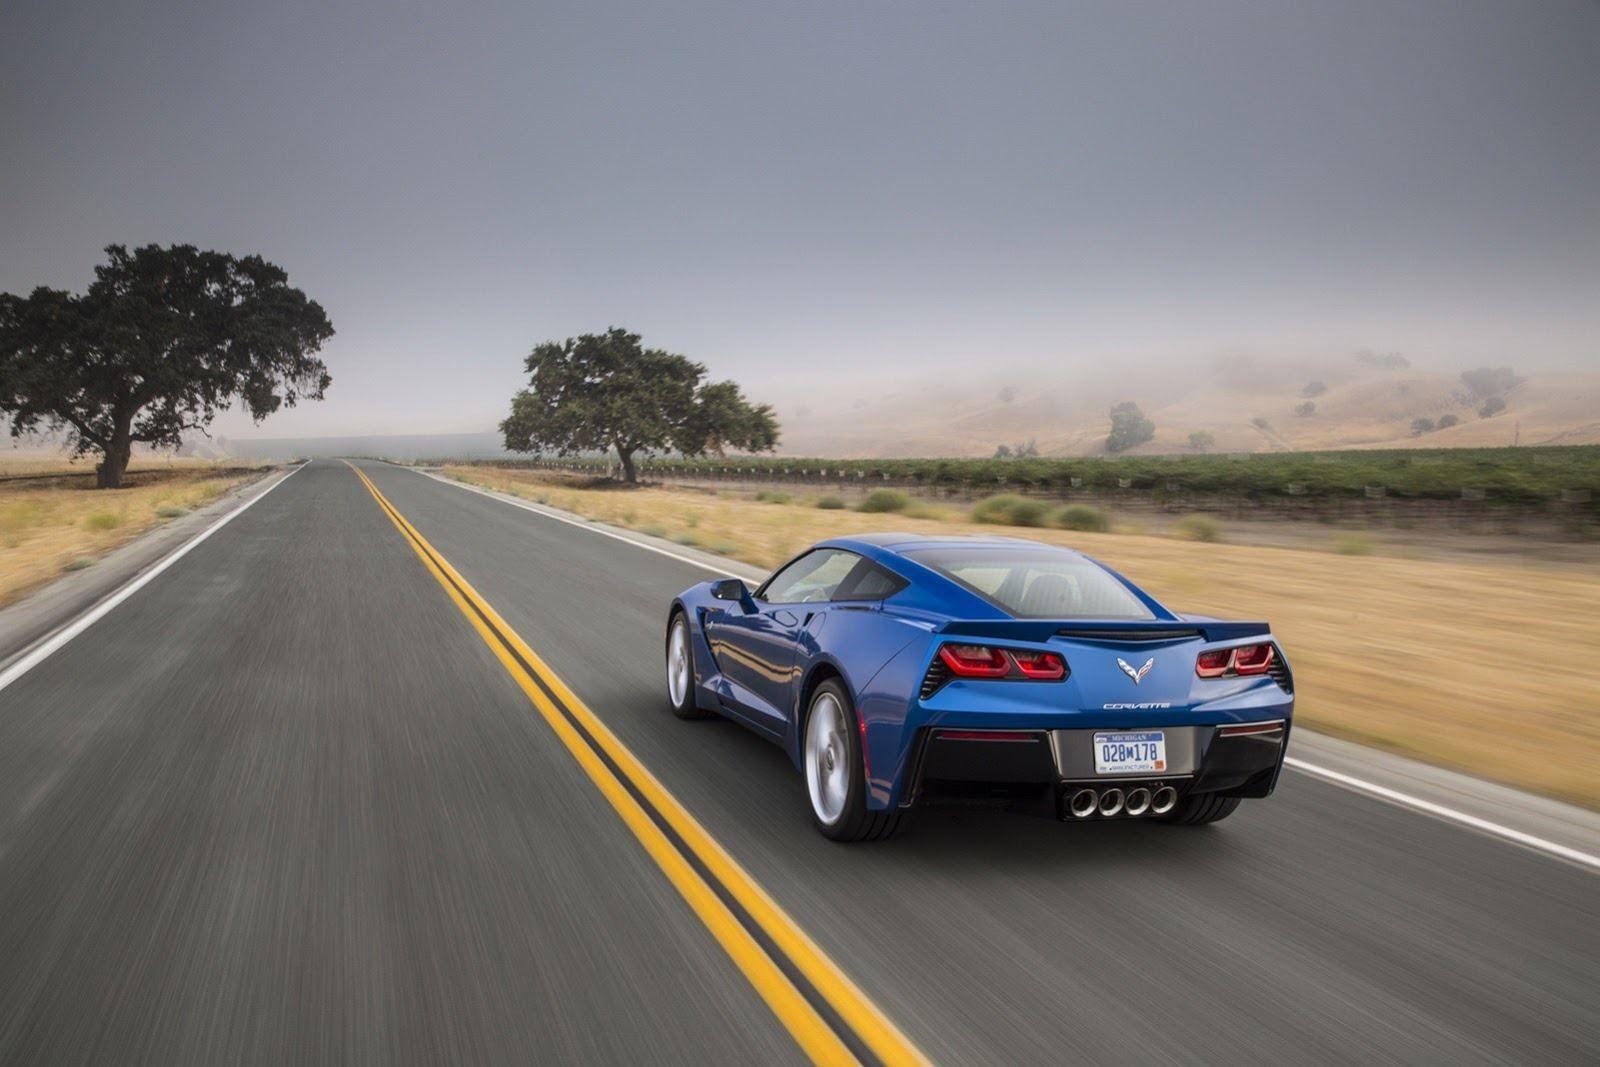 Chevrolet Corvette 2015 photo 107777 picture at high resolution